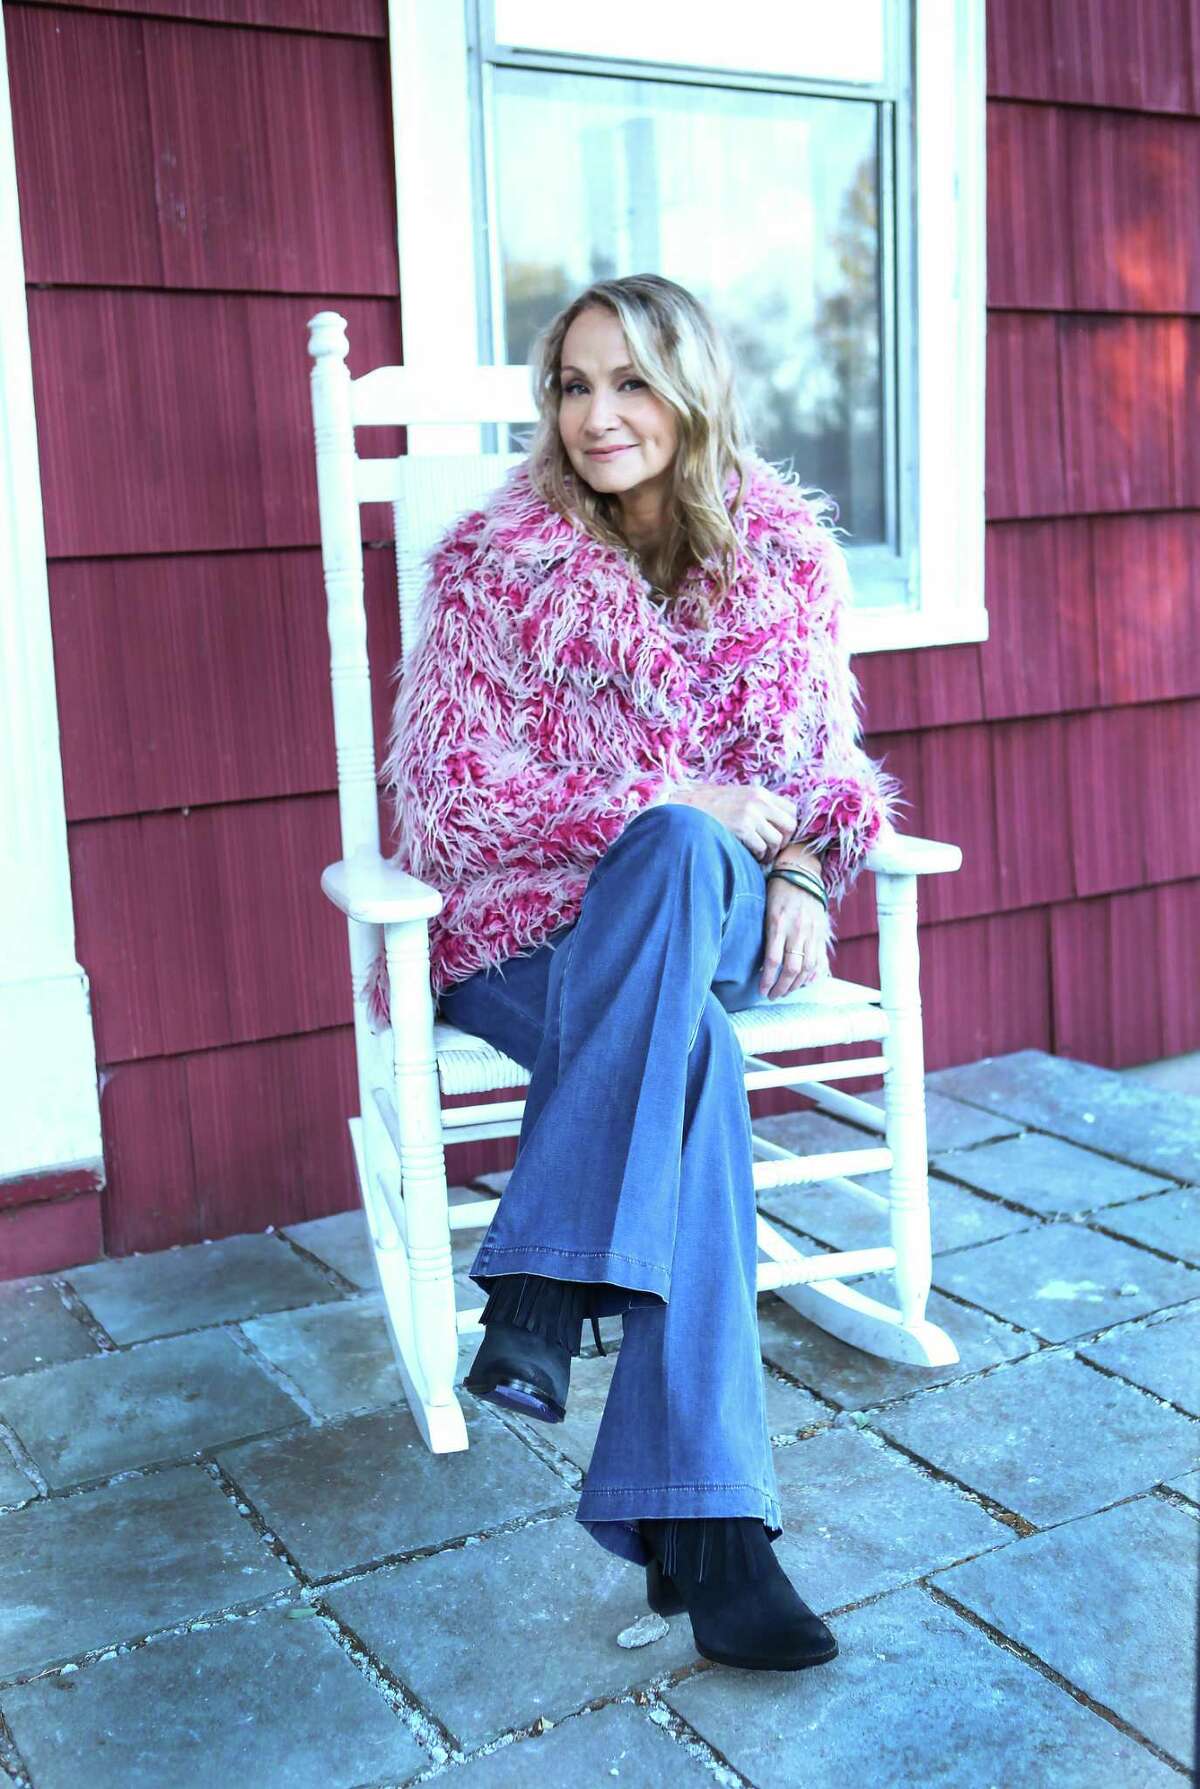 Joan Osborne will perform at Daryl’s House Club in Pawling, N.Y., on April 19.